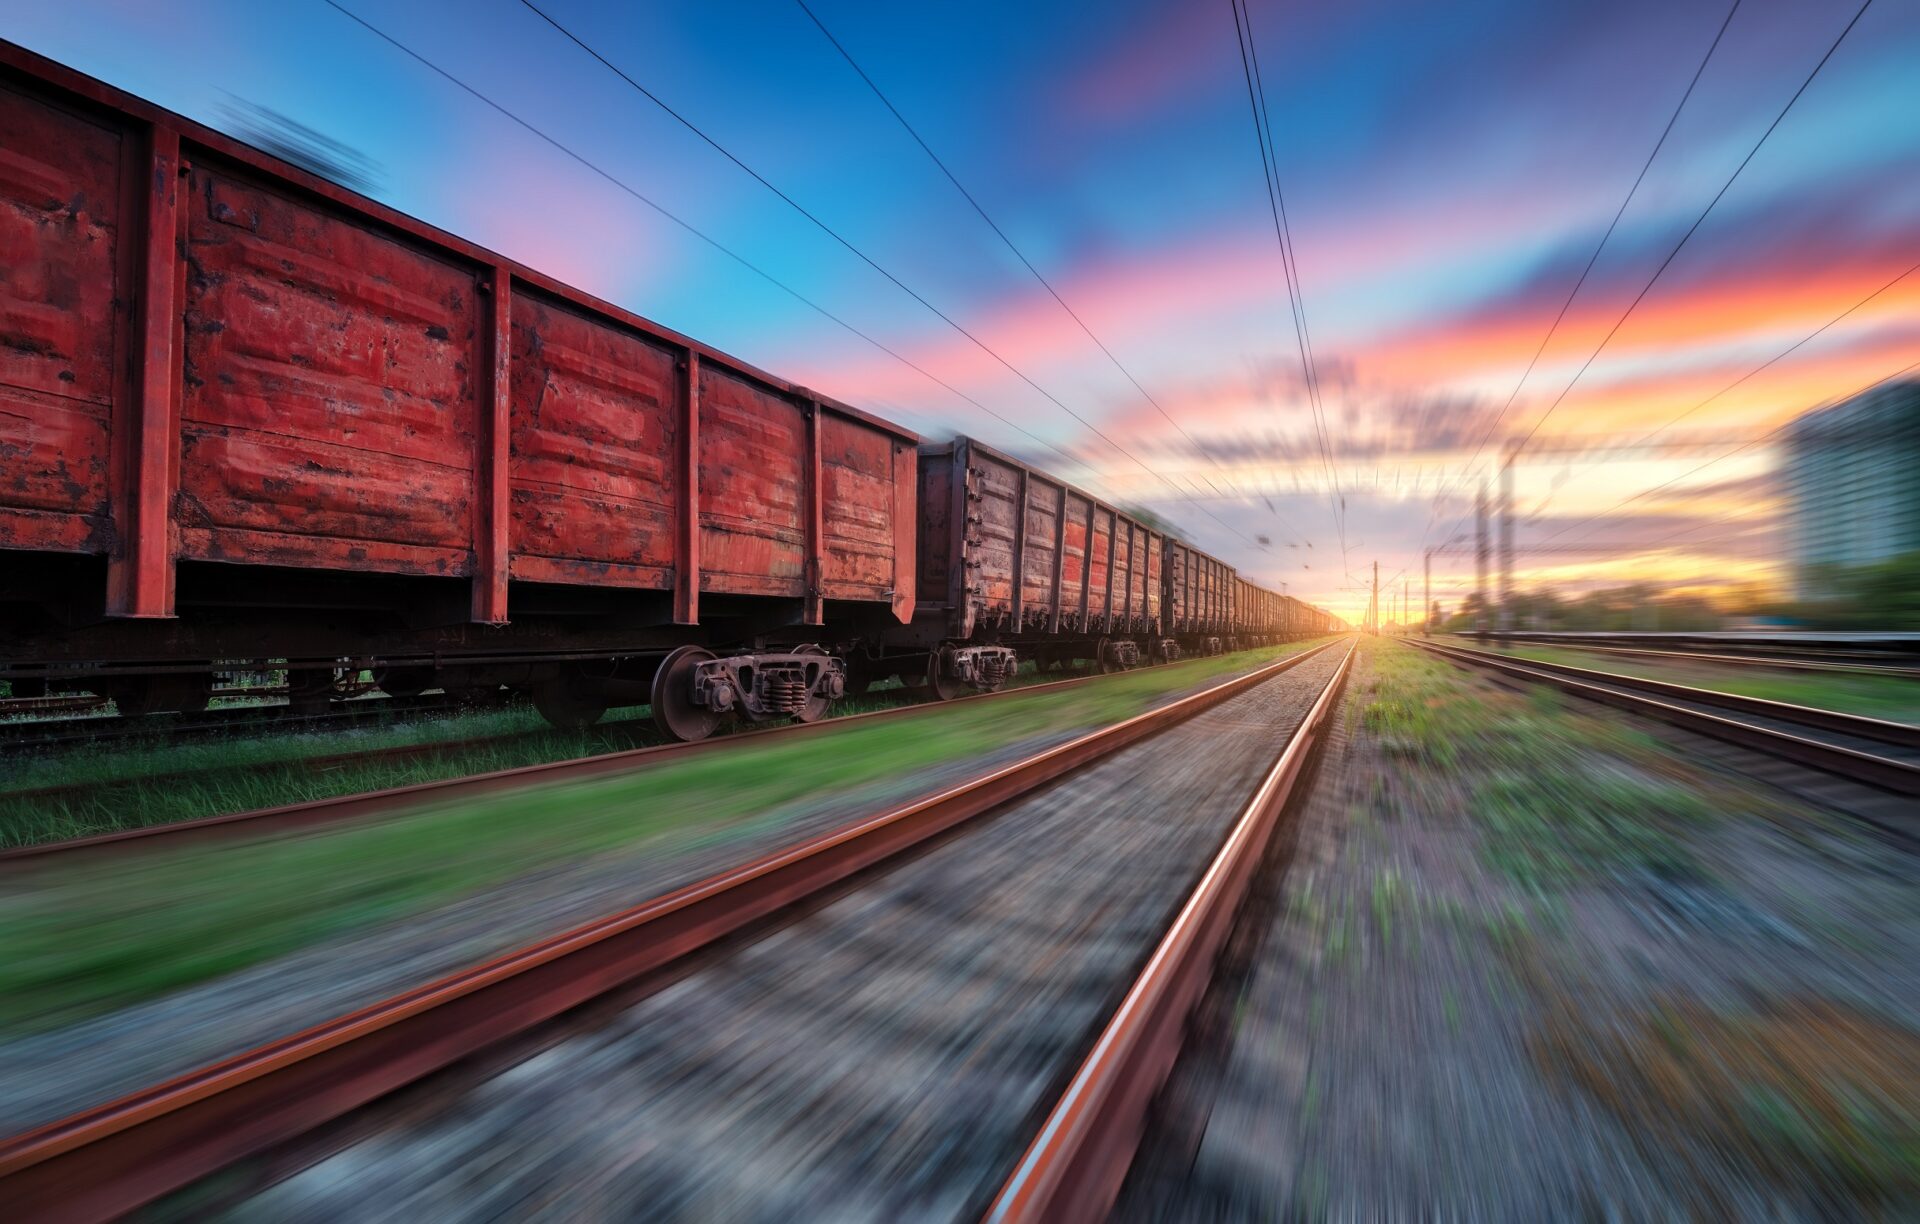 Protective Coatings for Railcars